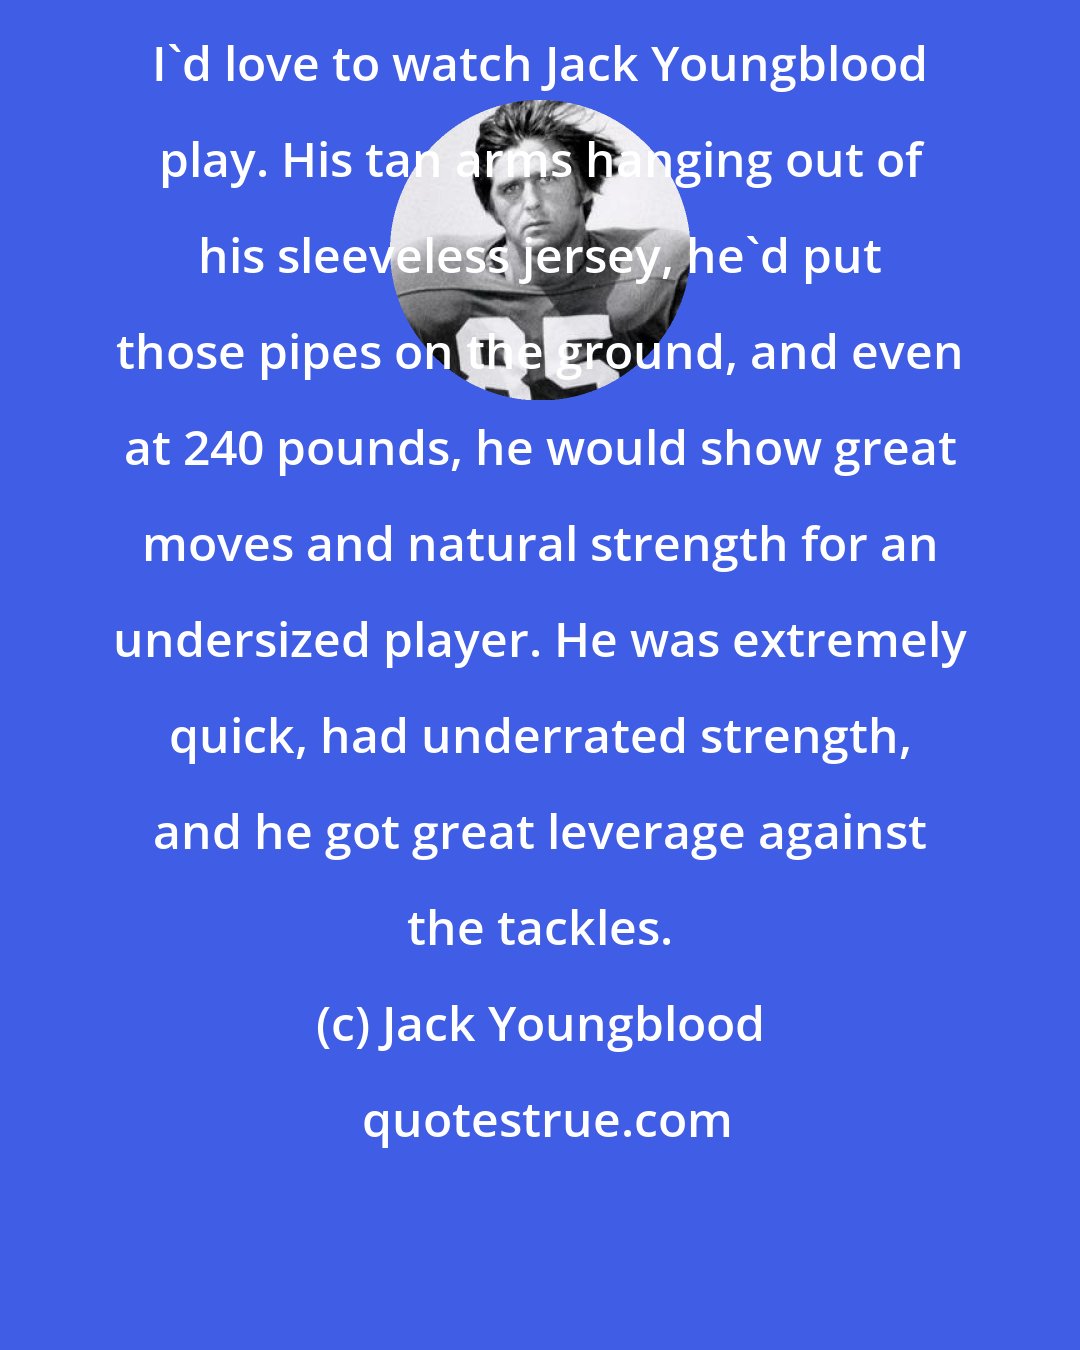 Jack Youngblood: I'd love to watch Jack Youngblood play. His tan arms hanging out of his sleeveless jersey, he'd put those pipes on the ground, and even at 240 pounds, he would show great moves and natural strength for an undersized player. He was extremely quick, had underrated strength, and he got great leverage against the tackles.